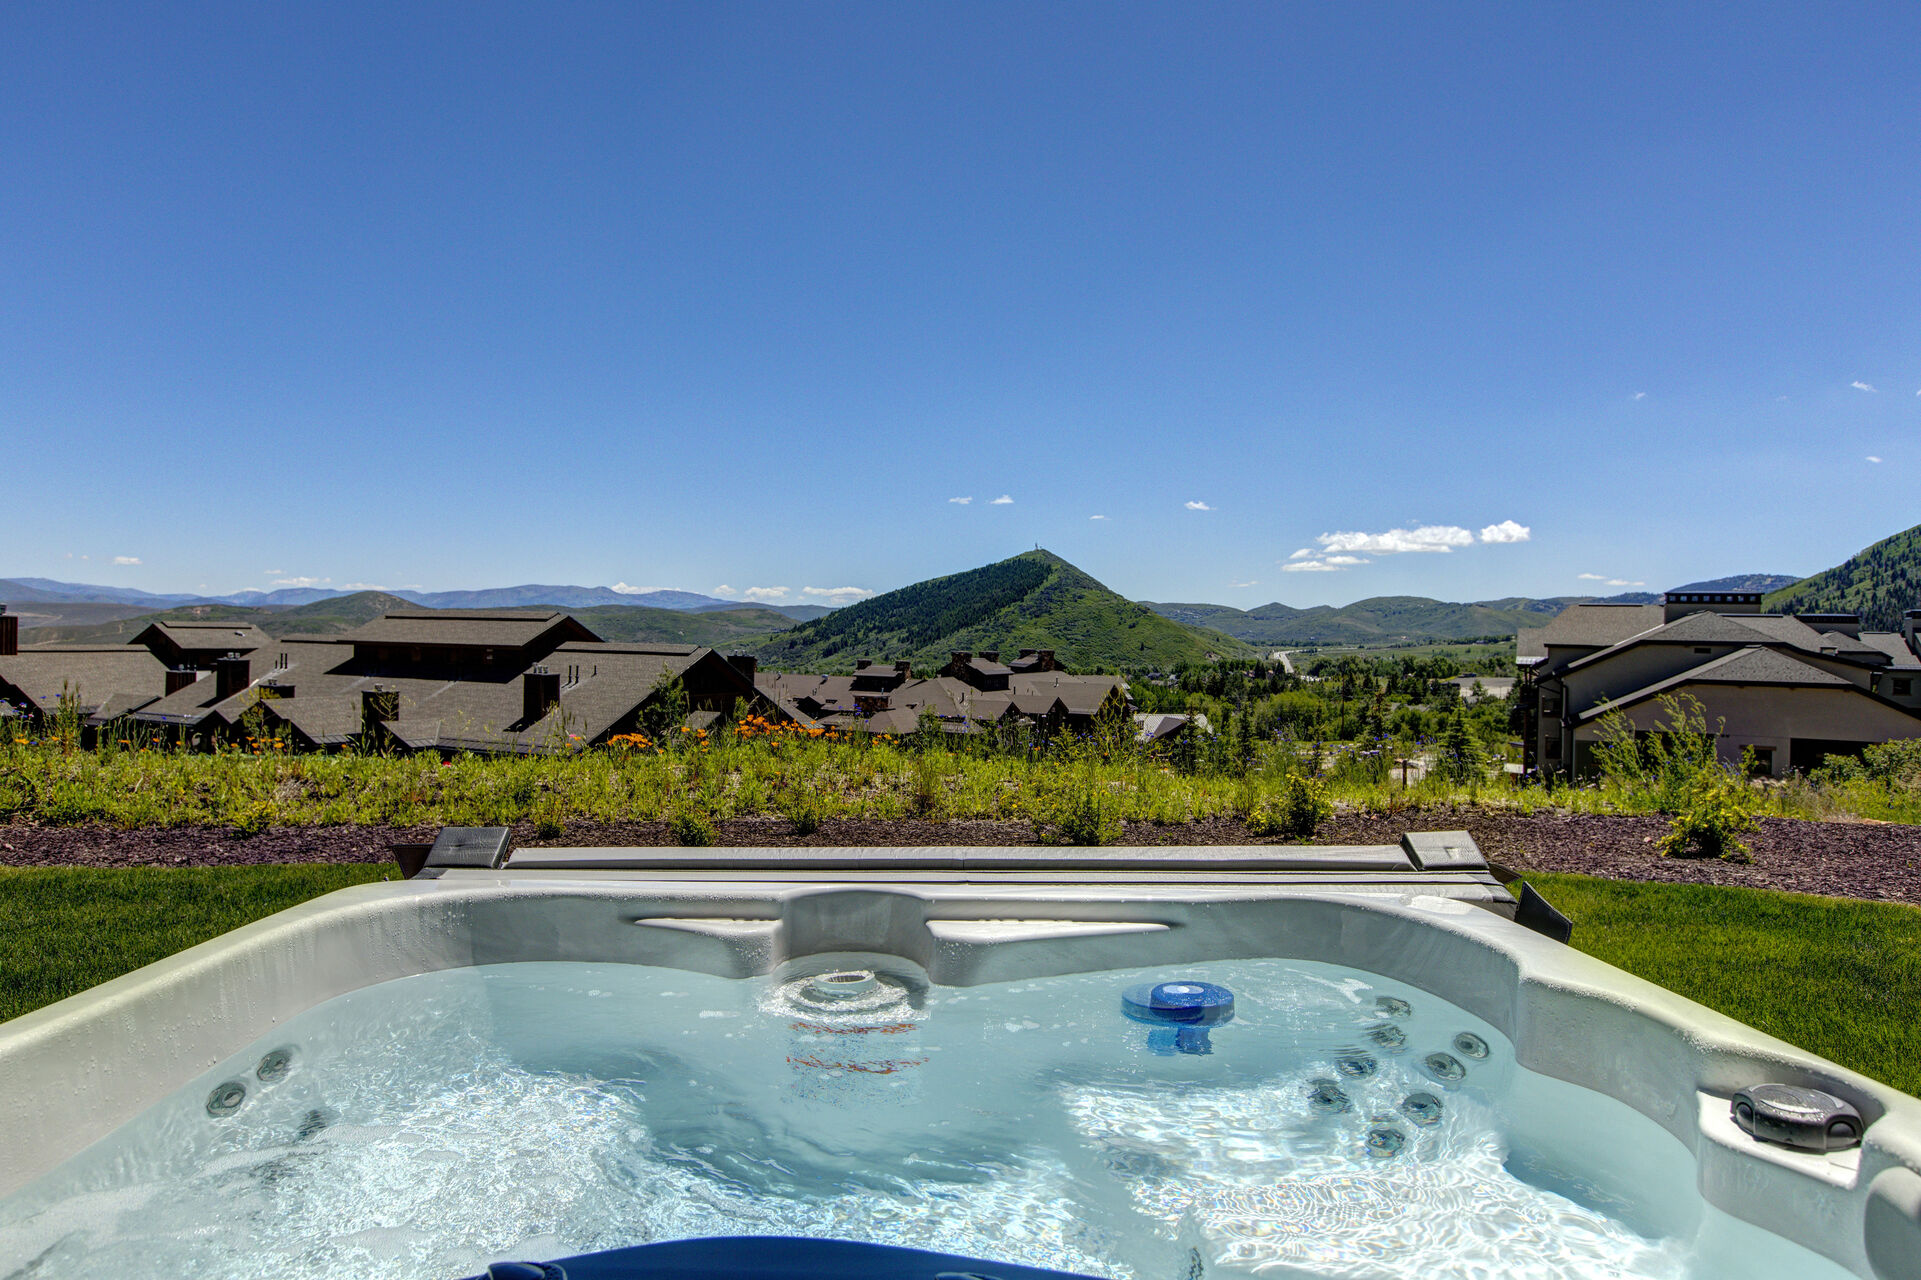 Stunning views from the homes' private hot tub patio